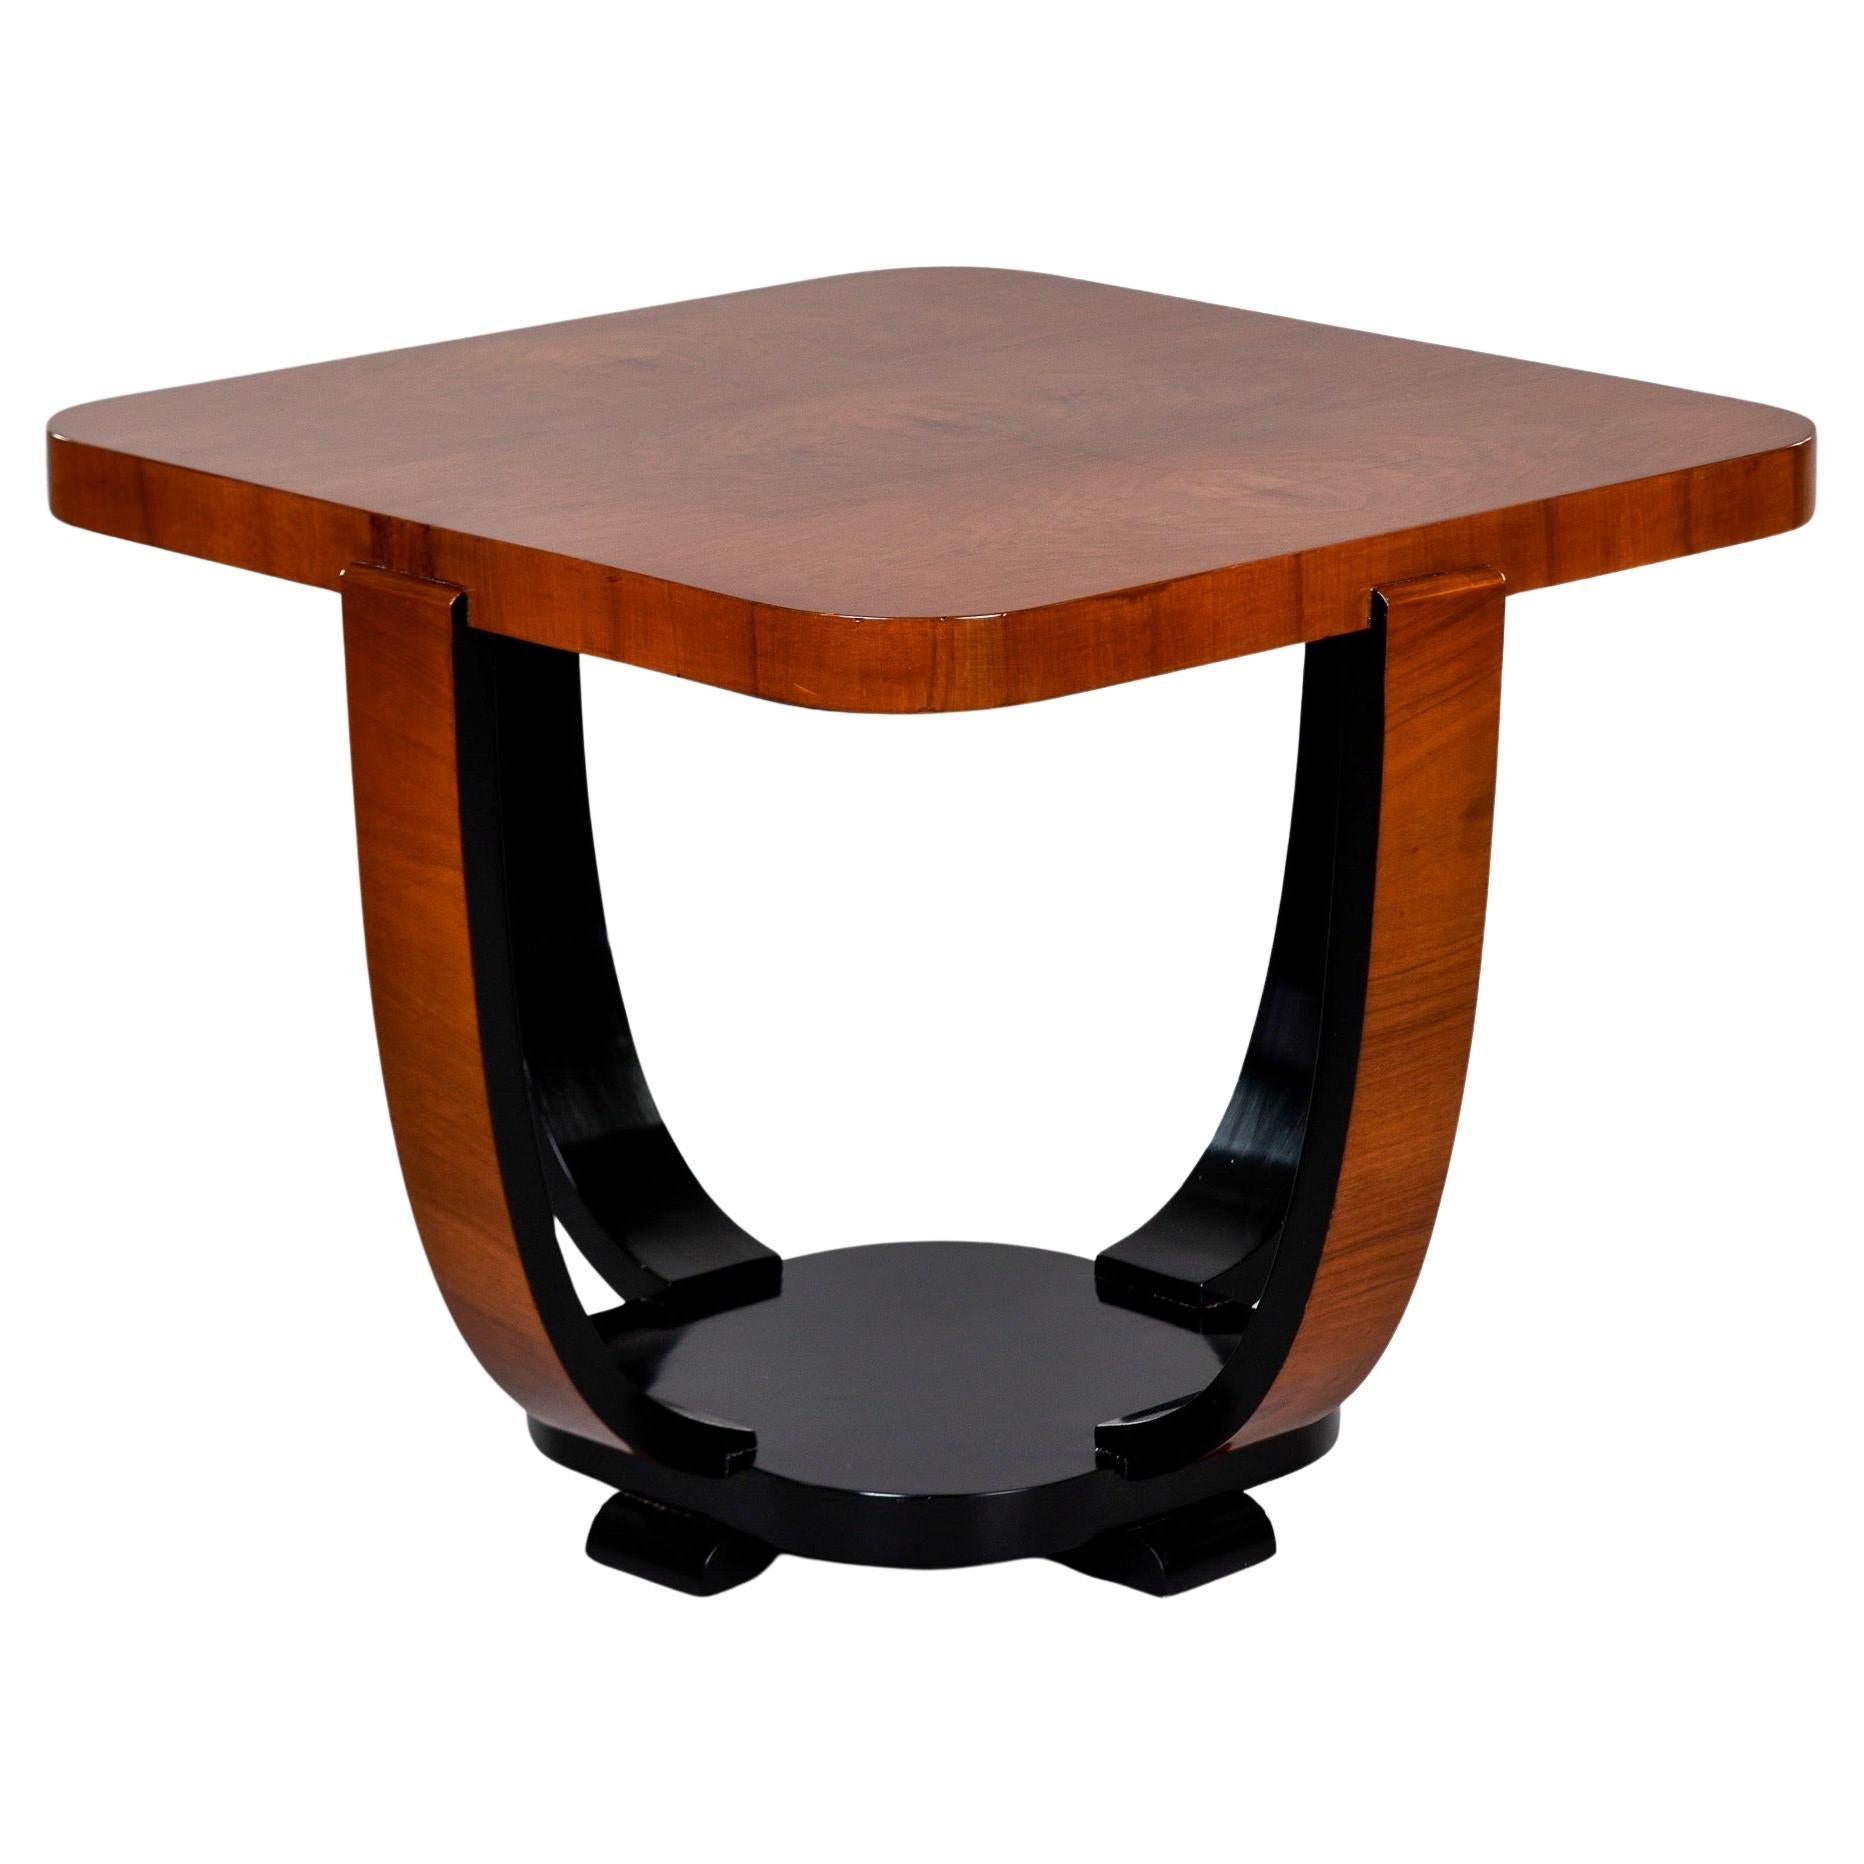 Art Deco Walnut Square Shaped Side Table with Black Detailing